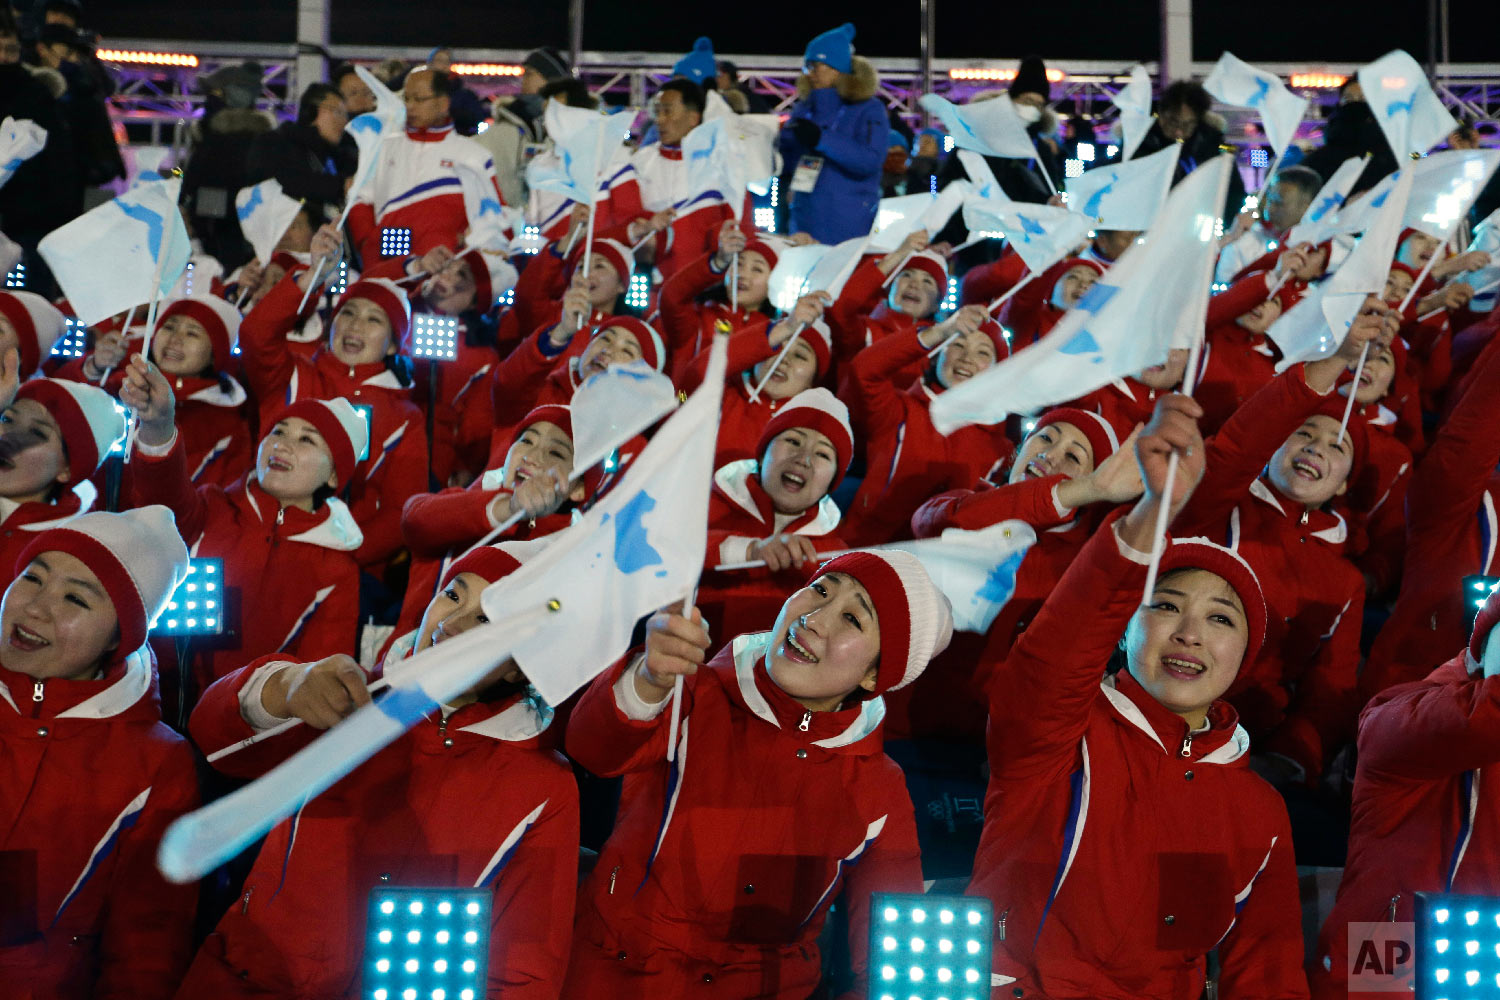  Members of the North Korean delegation wave flags of the combined Koreas before the opening ceremony of the 2018 Winter Olympics in Pyeongchang, South Korea, Friday, Feb. 9, 2018. (AP Photo/Natacha Pisarenko) 